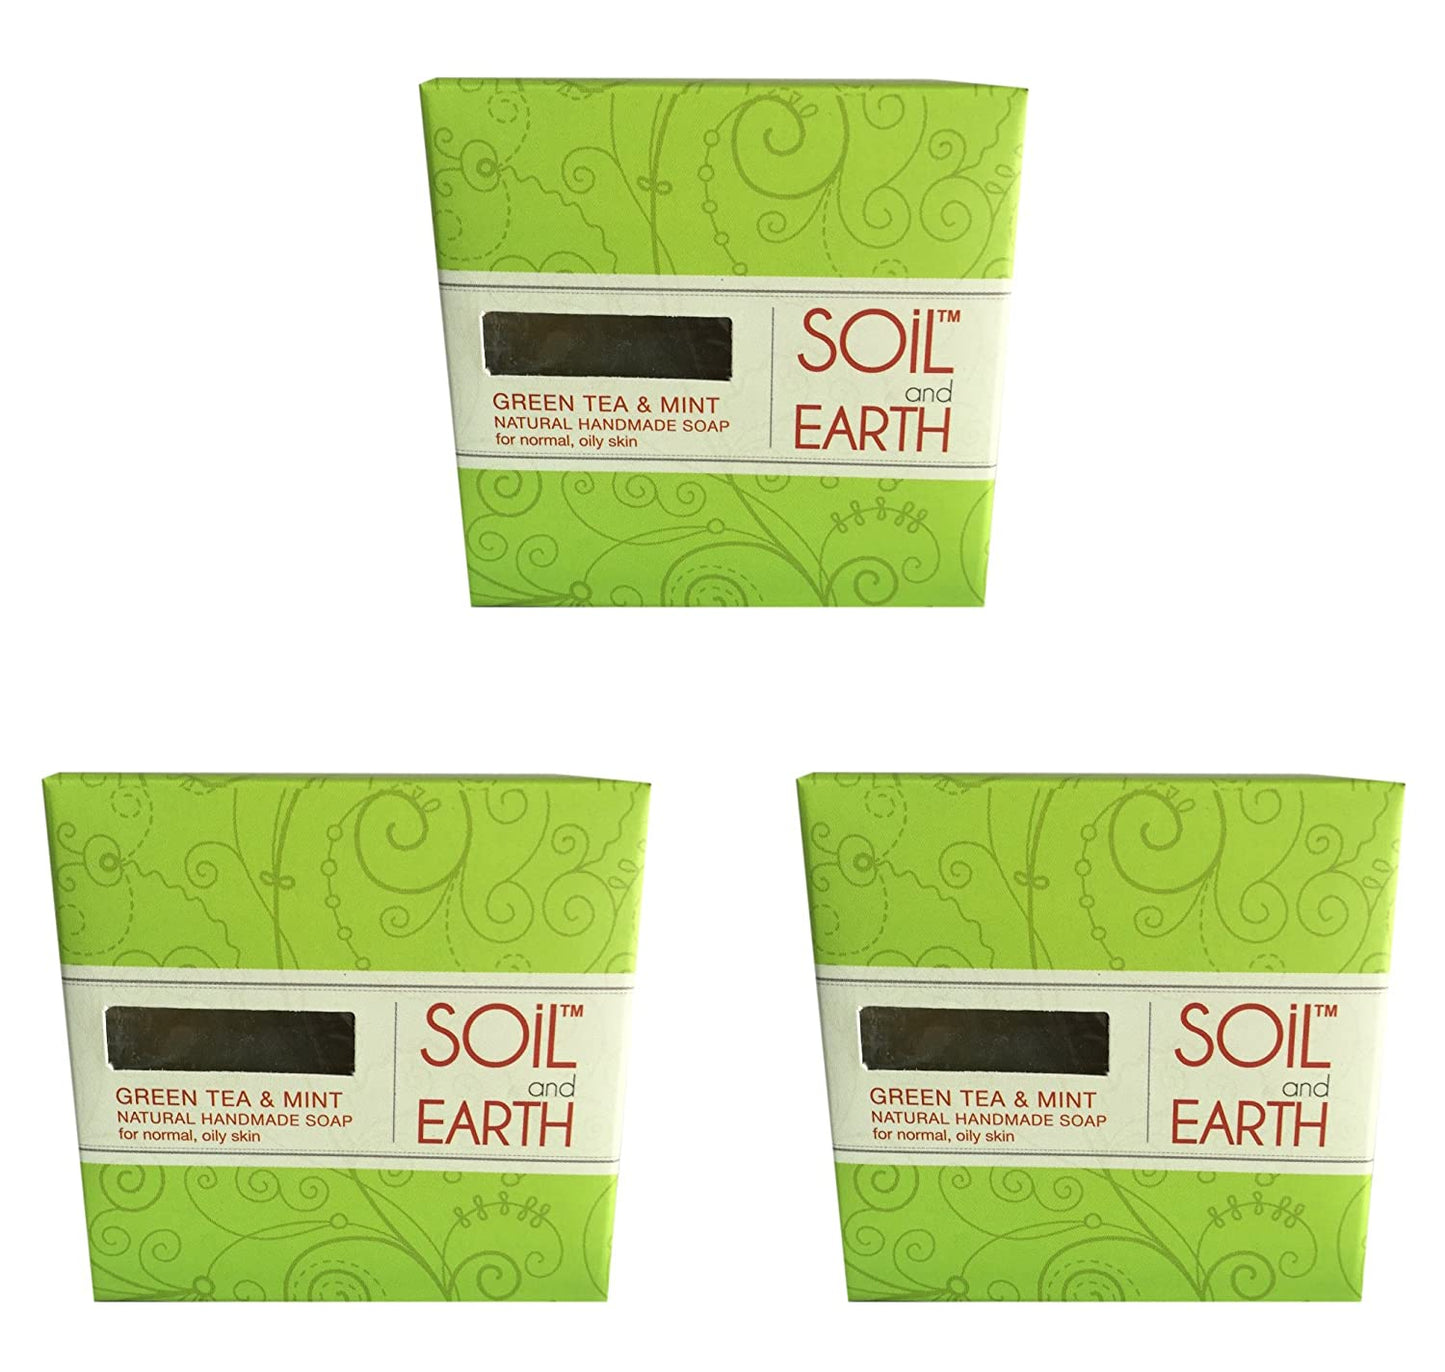 SOIL AND EARTH NATURAL HANDMADE SOAP - GREEN TEA & MINT (Pack of 4)